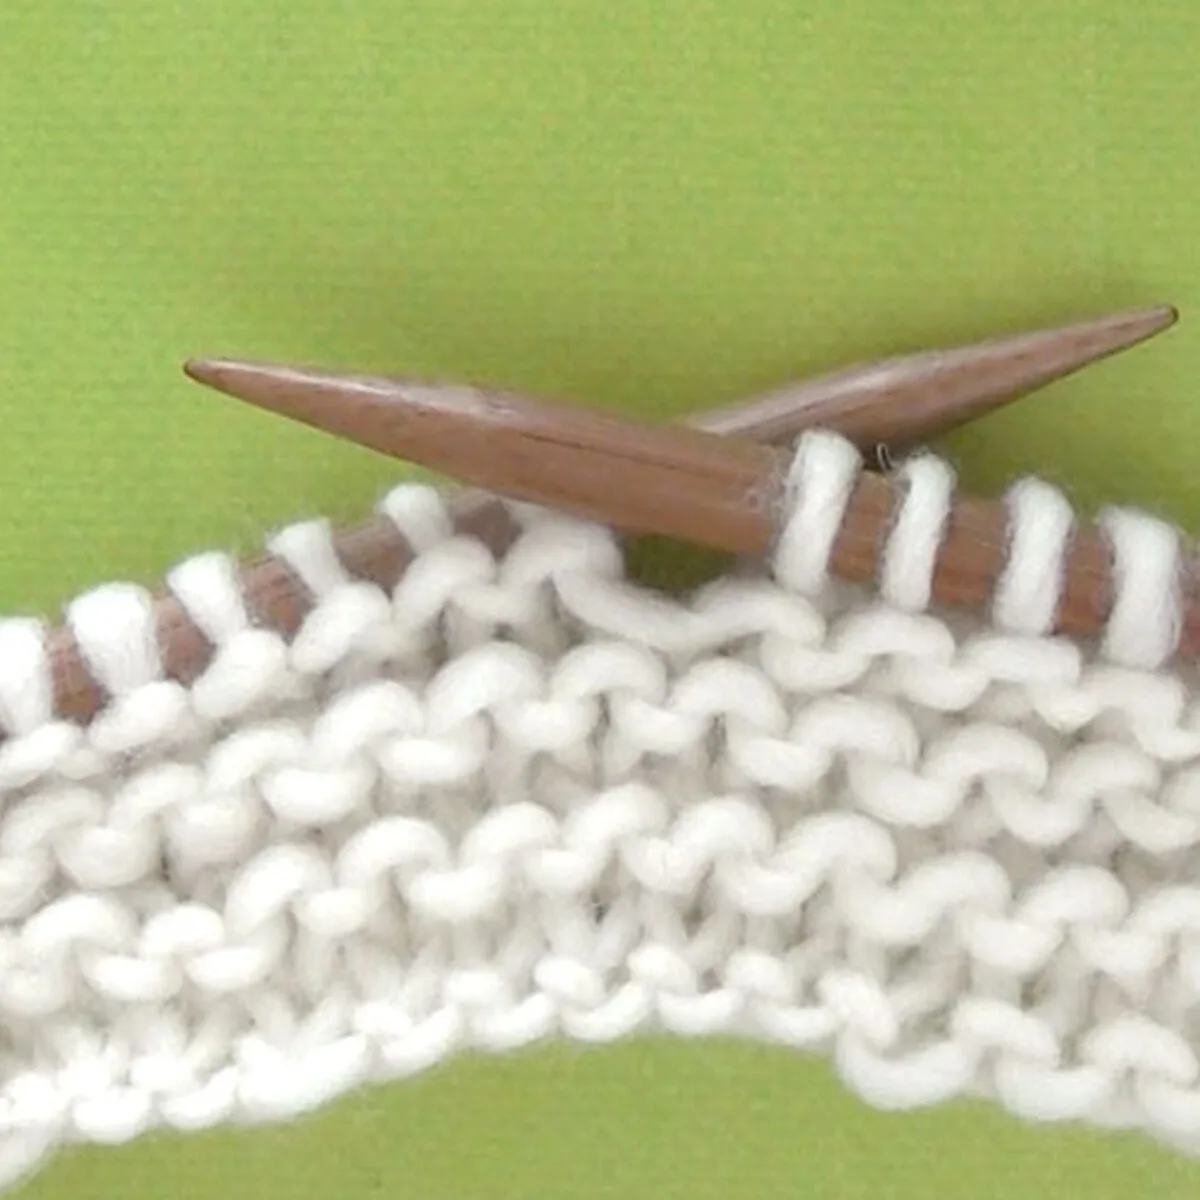 Learn how to knit - Essential knitting techniques for beginners